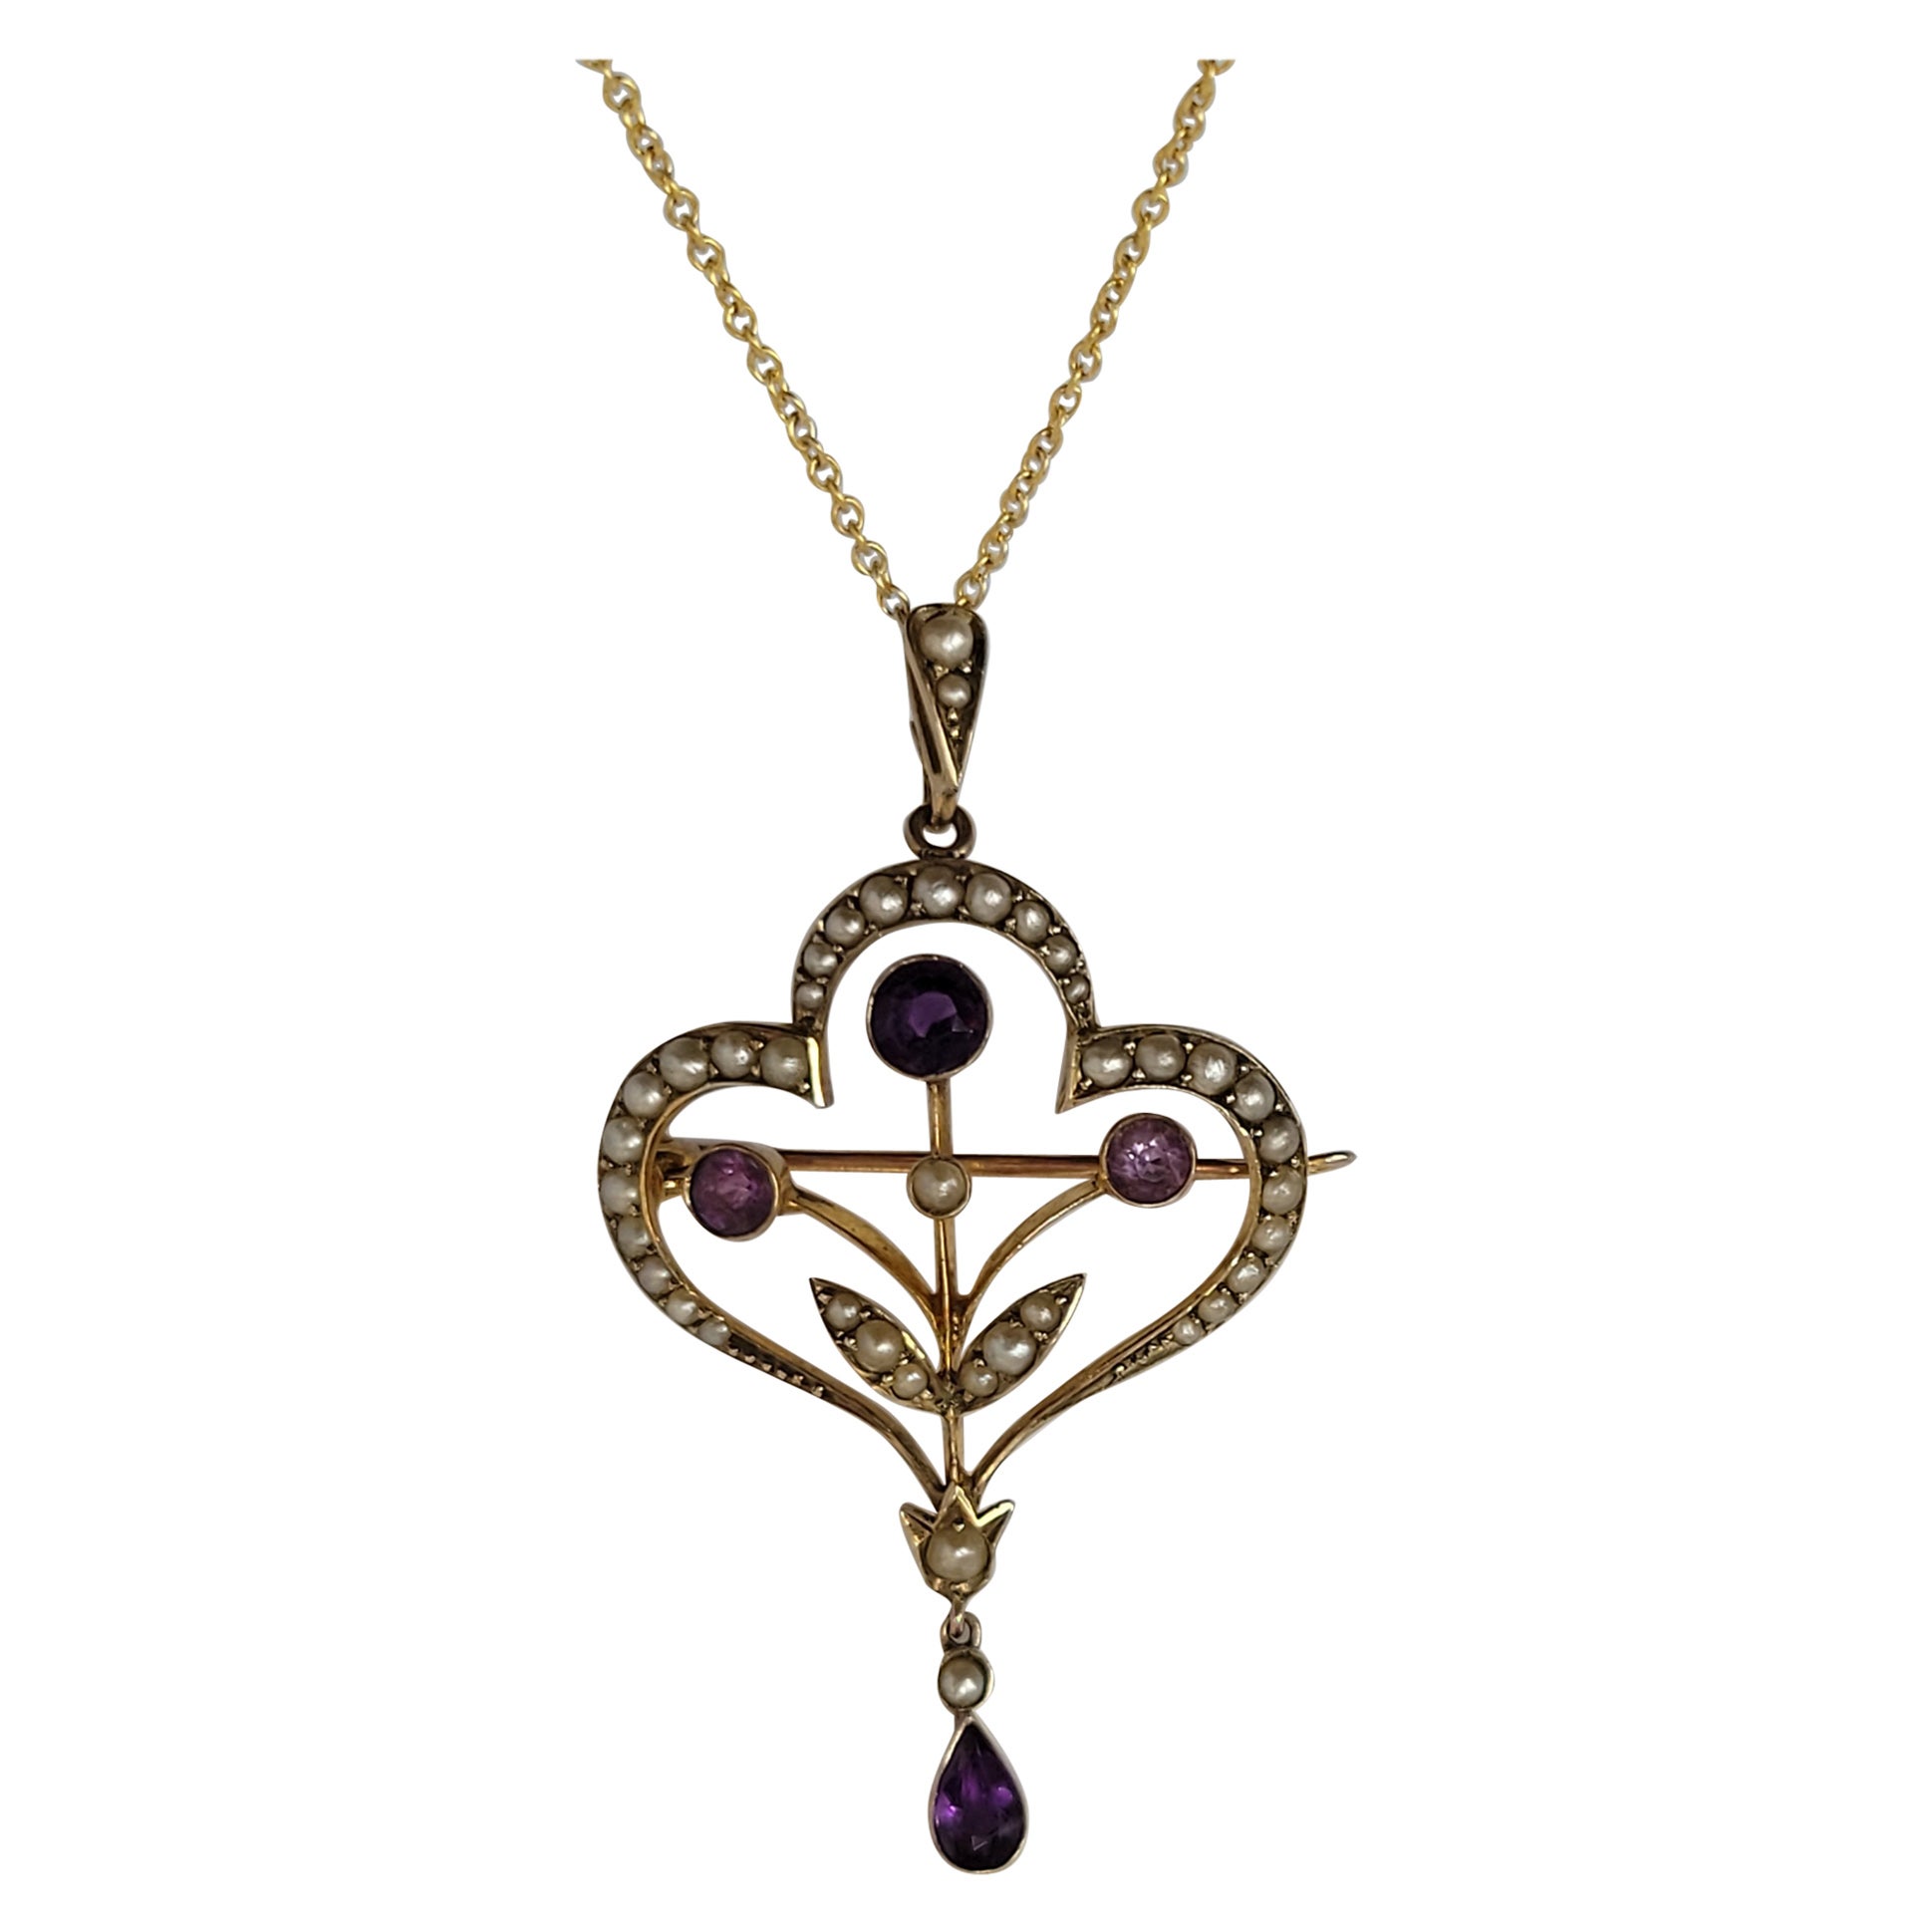 Antique Edwardian Amethyst Pearl Gold Brooch Pendant Necklace For Sale